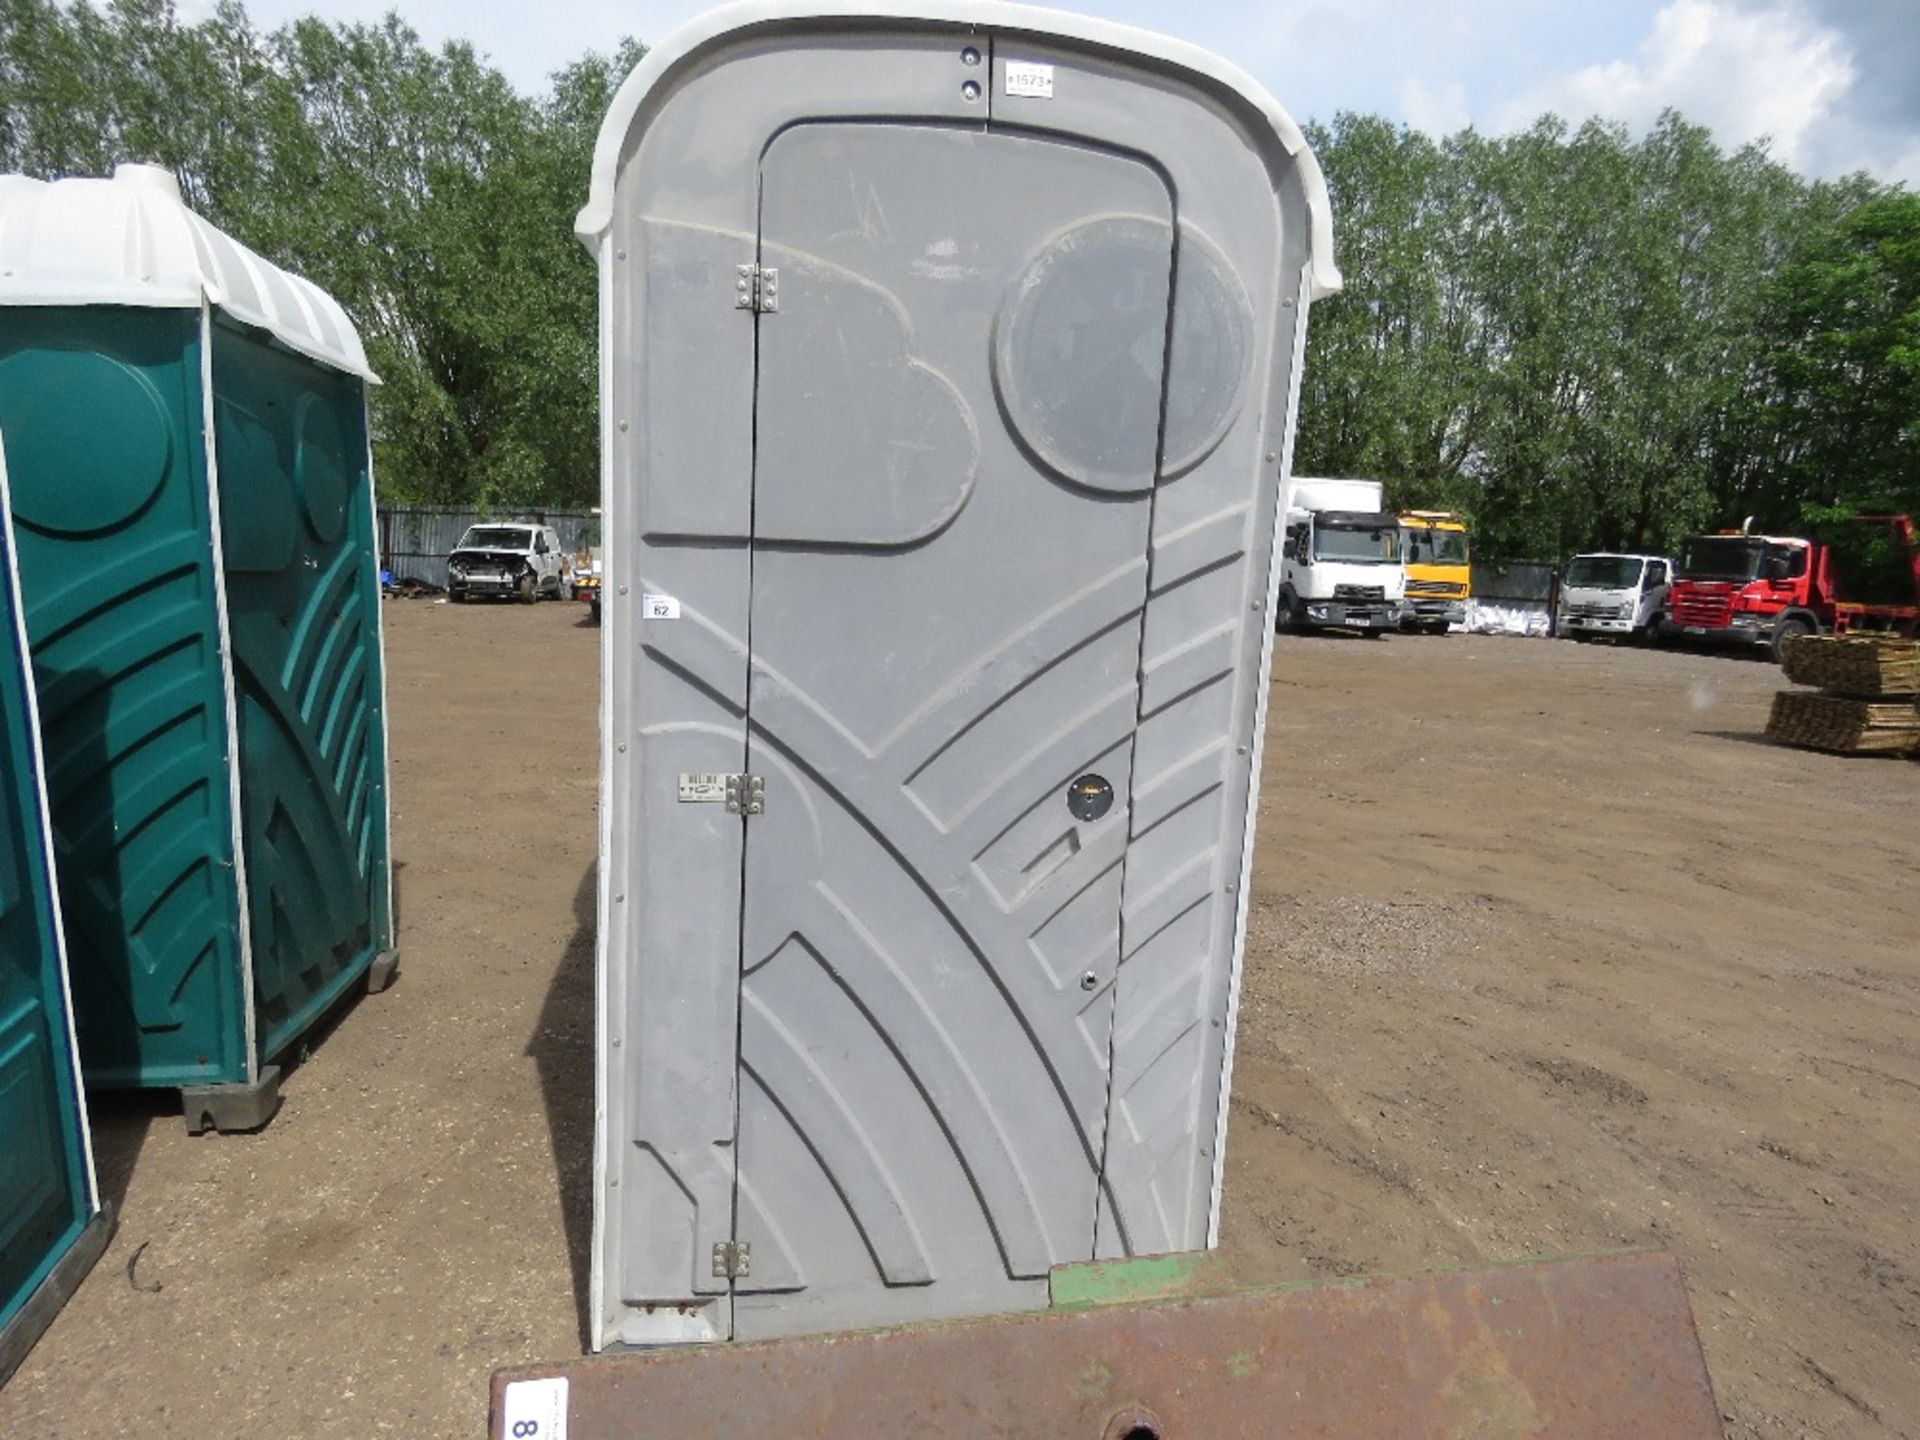 PORTABLE SITE / EVENTS TOILET, DIRECT FROM EVENTS COMPANY DUE TO ONGOING REPLACEMENT PRGRAMME. - Image 2 of 4